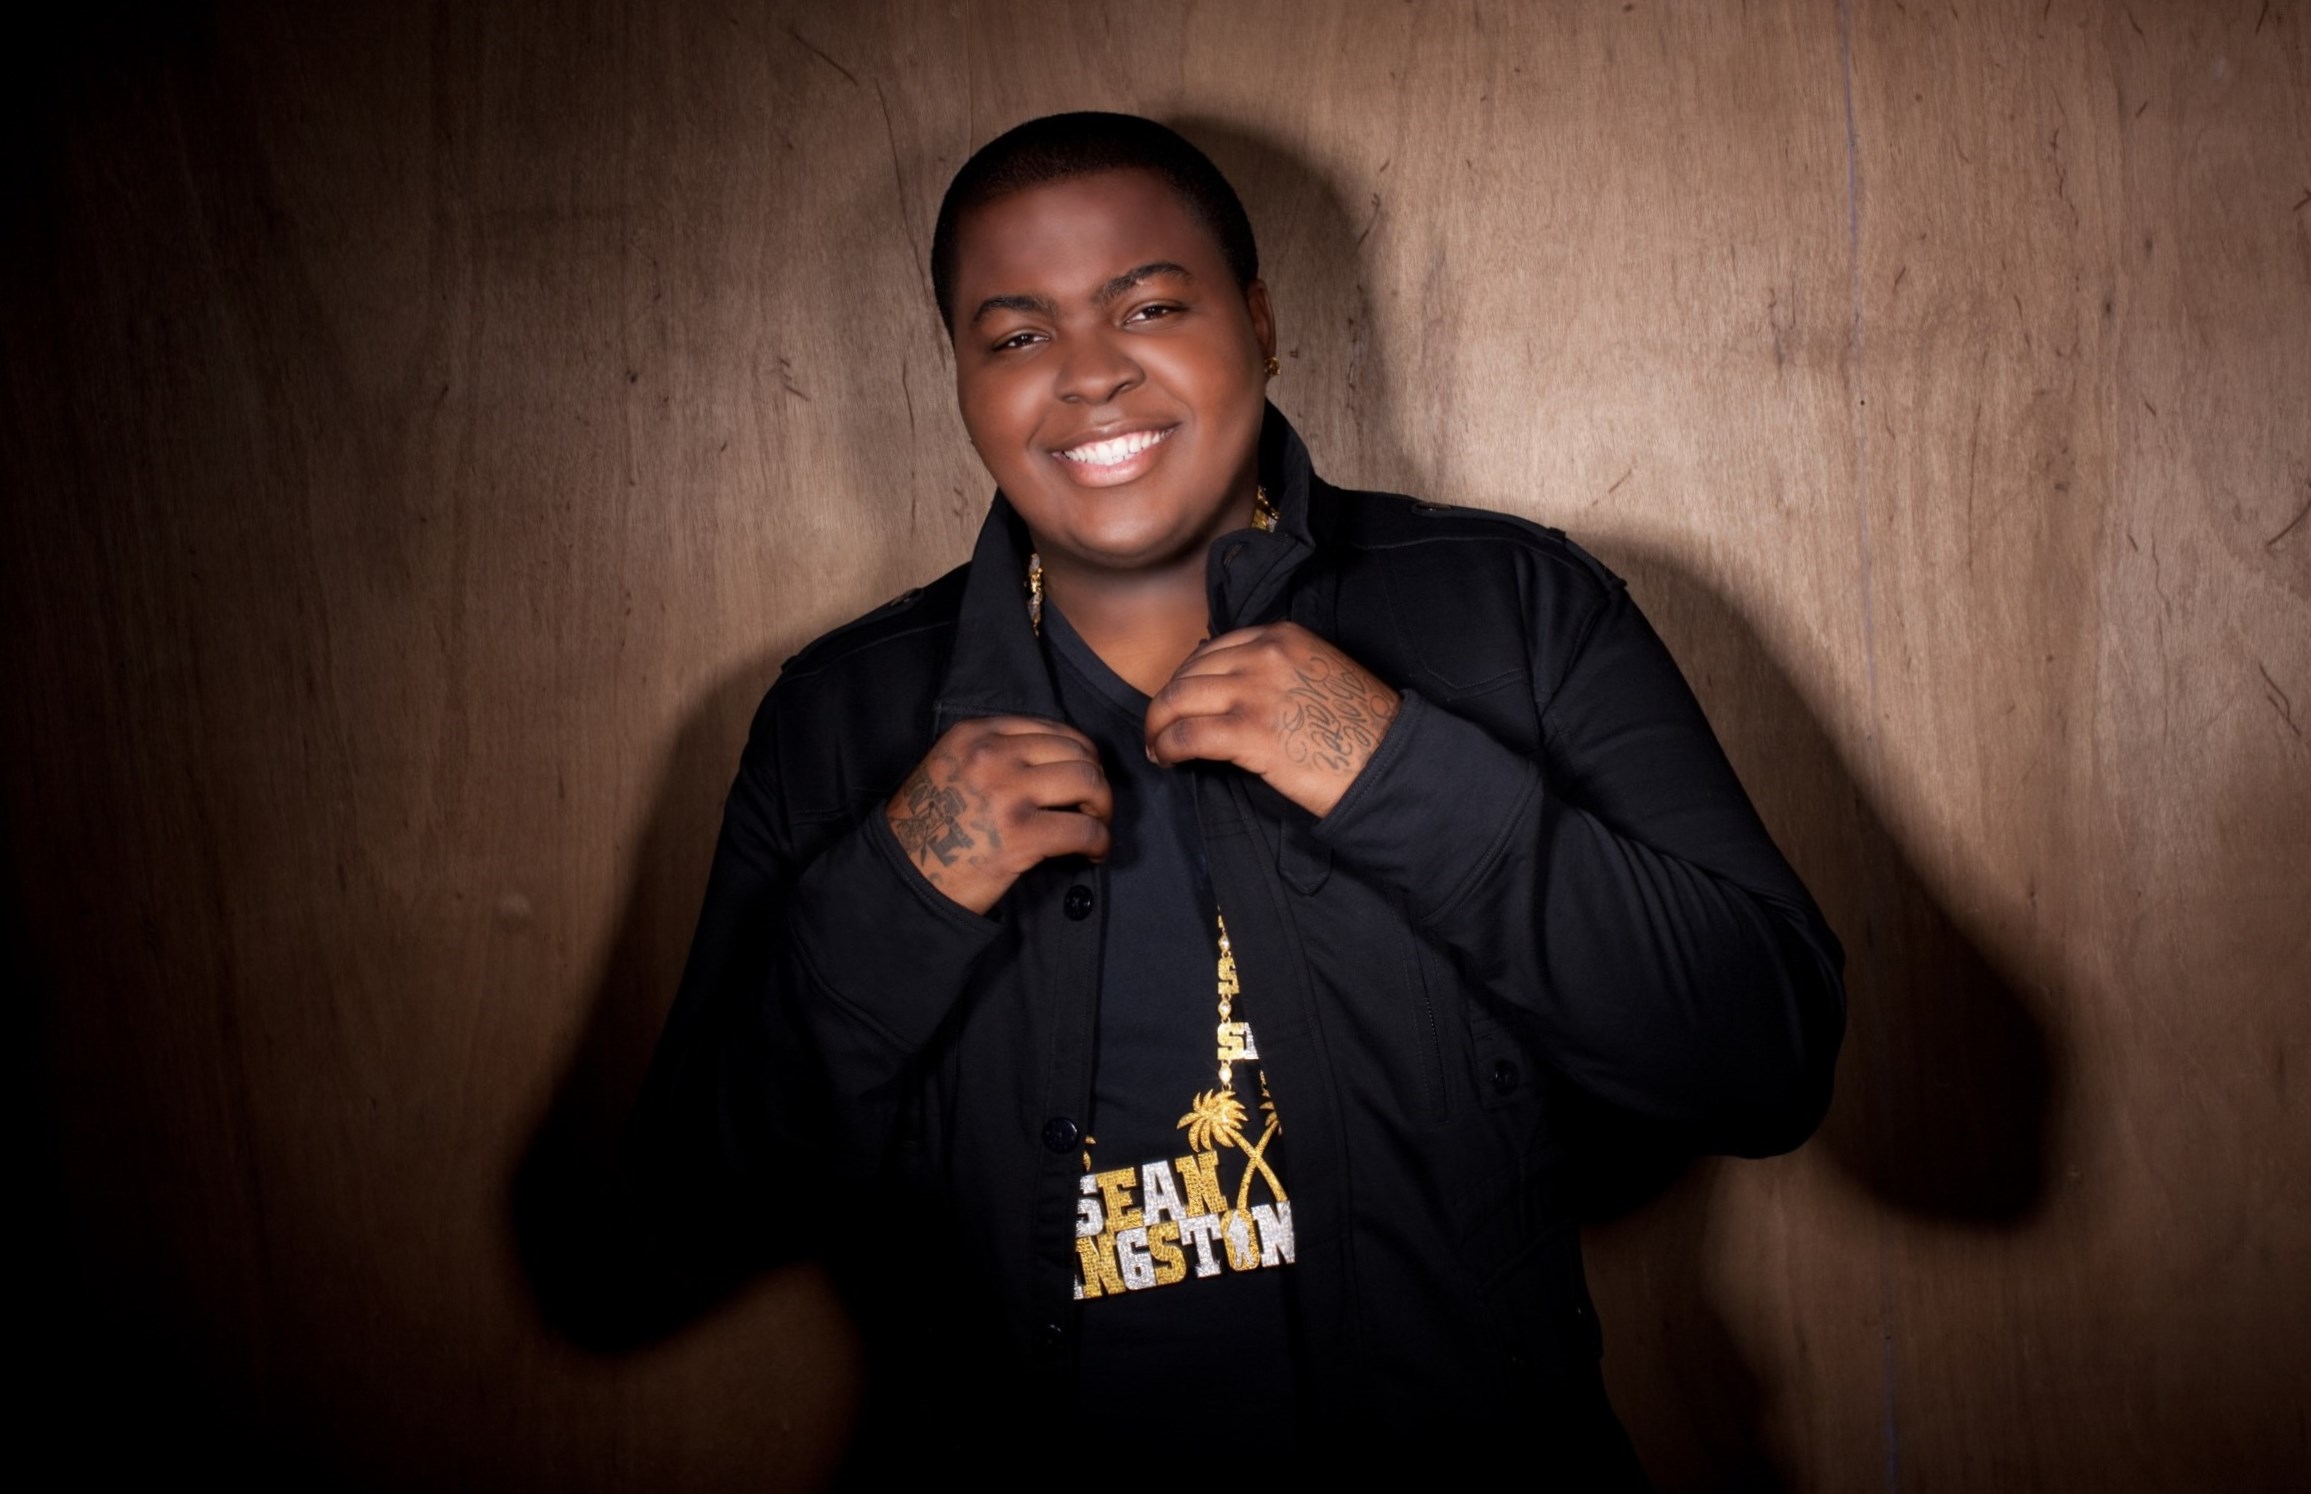 Sean Kingston weight, height and age. We know it all!